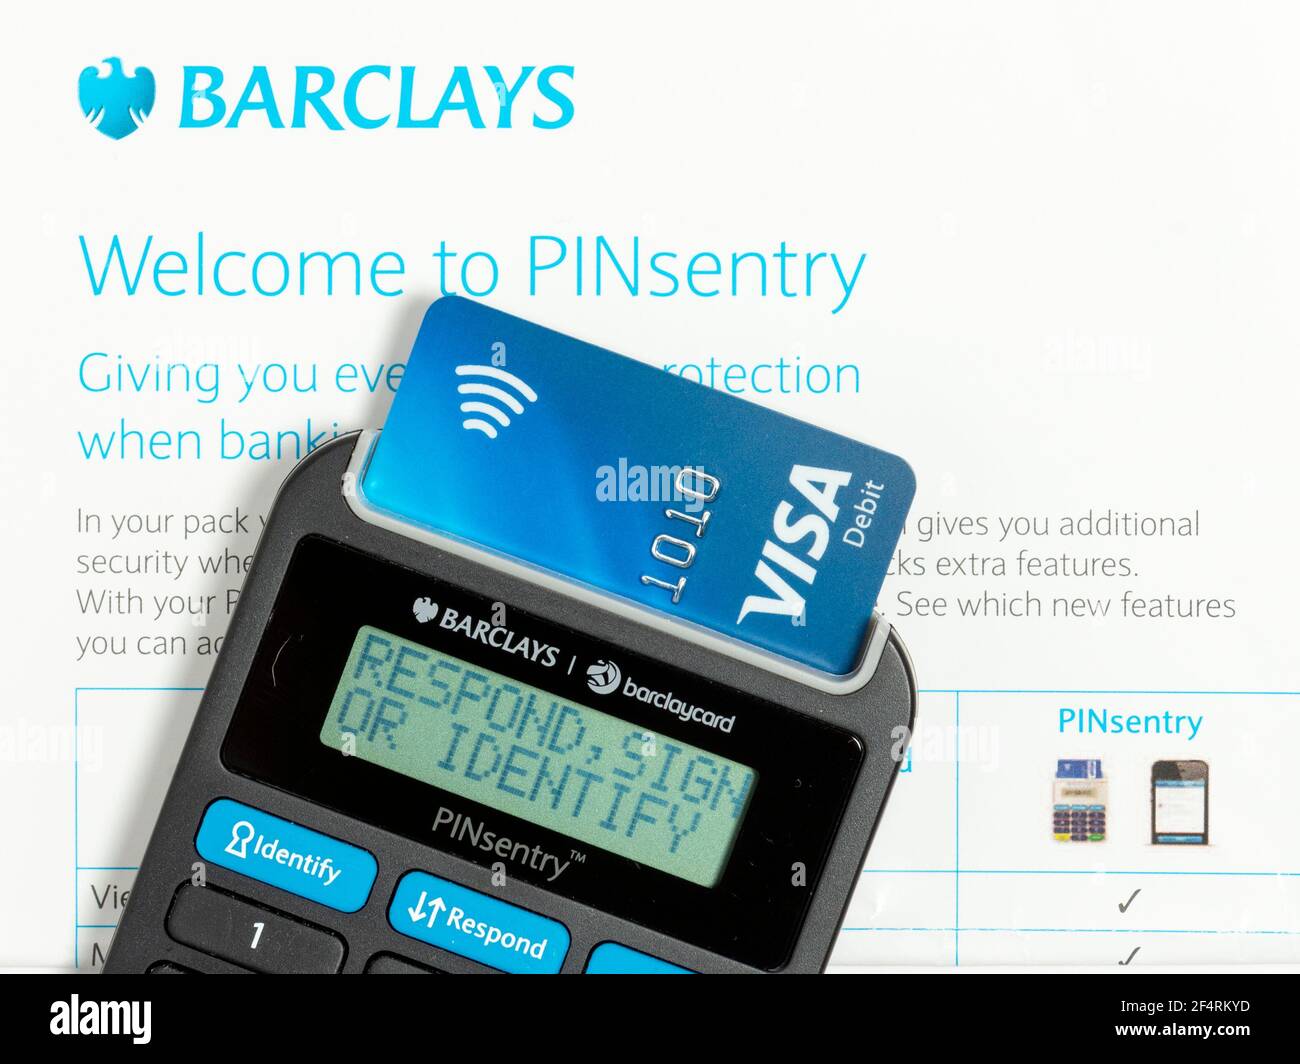 Barclays Pinsentry card reader device with Visa Debit card and welcome to PINsentry letter close up. Stock Photo